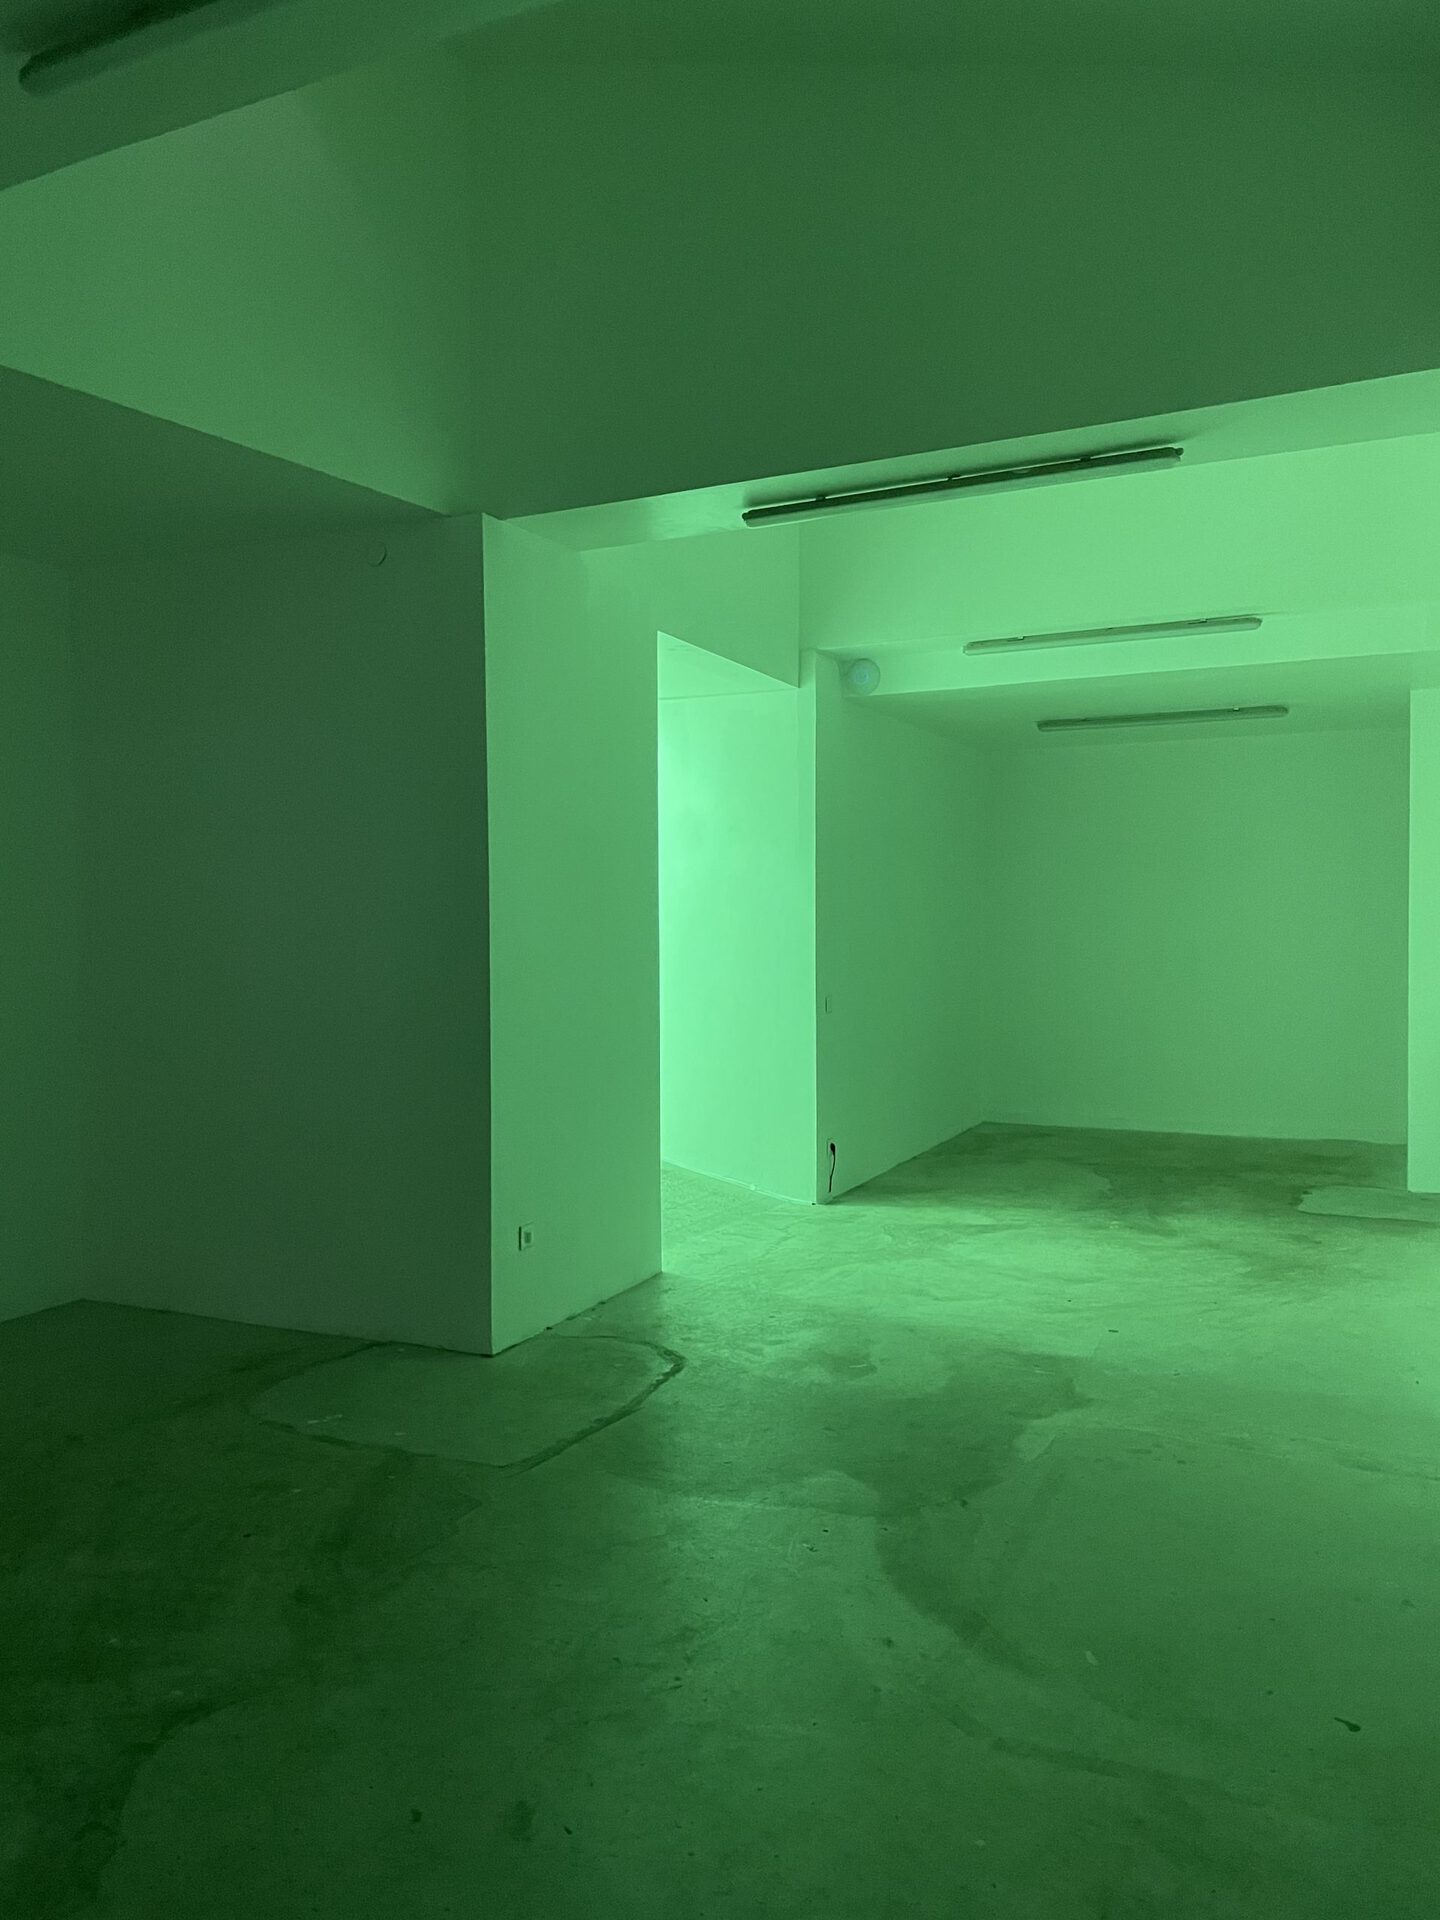 Fête Permanente, installation view, Robert Filliou, Greetings From L / We are all green (1977), 2021